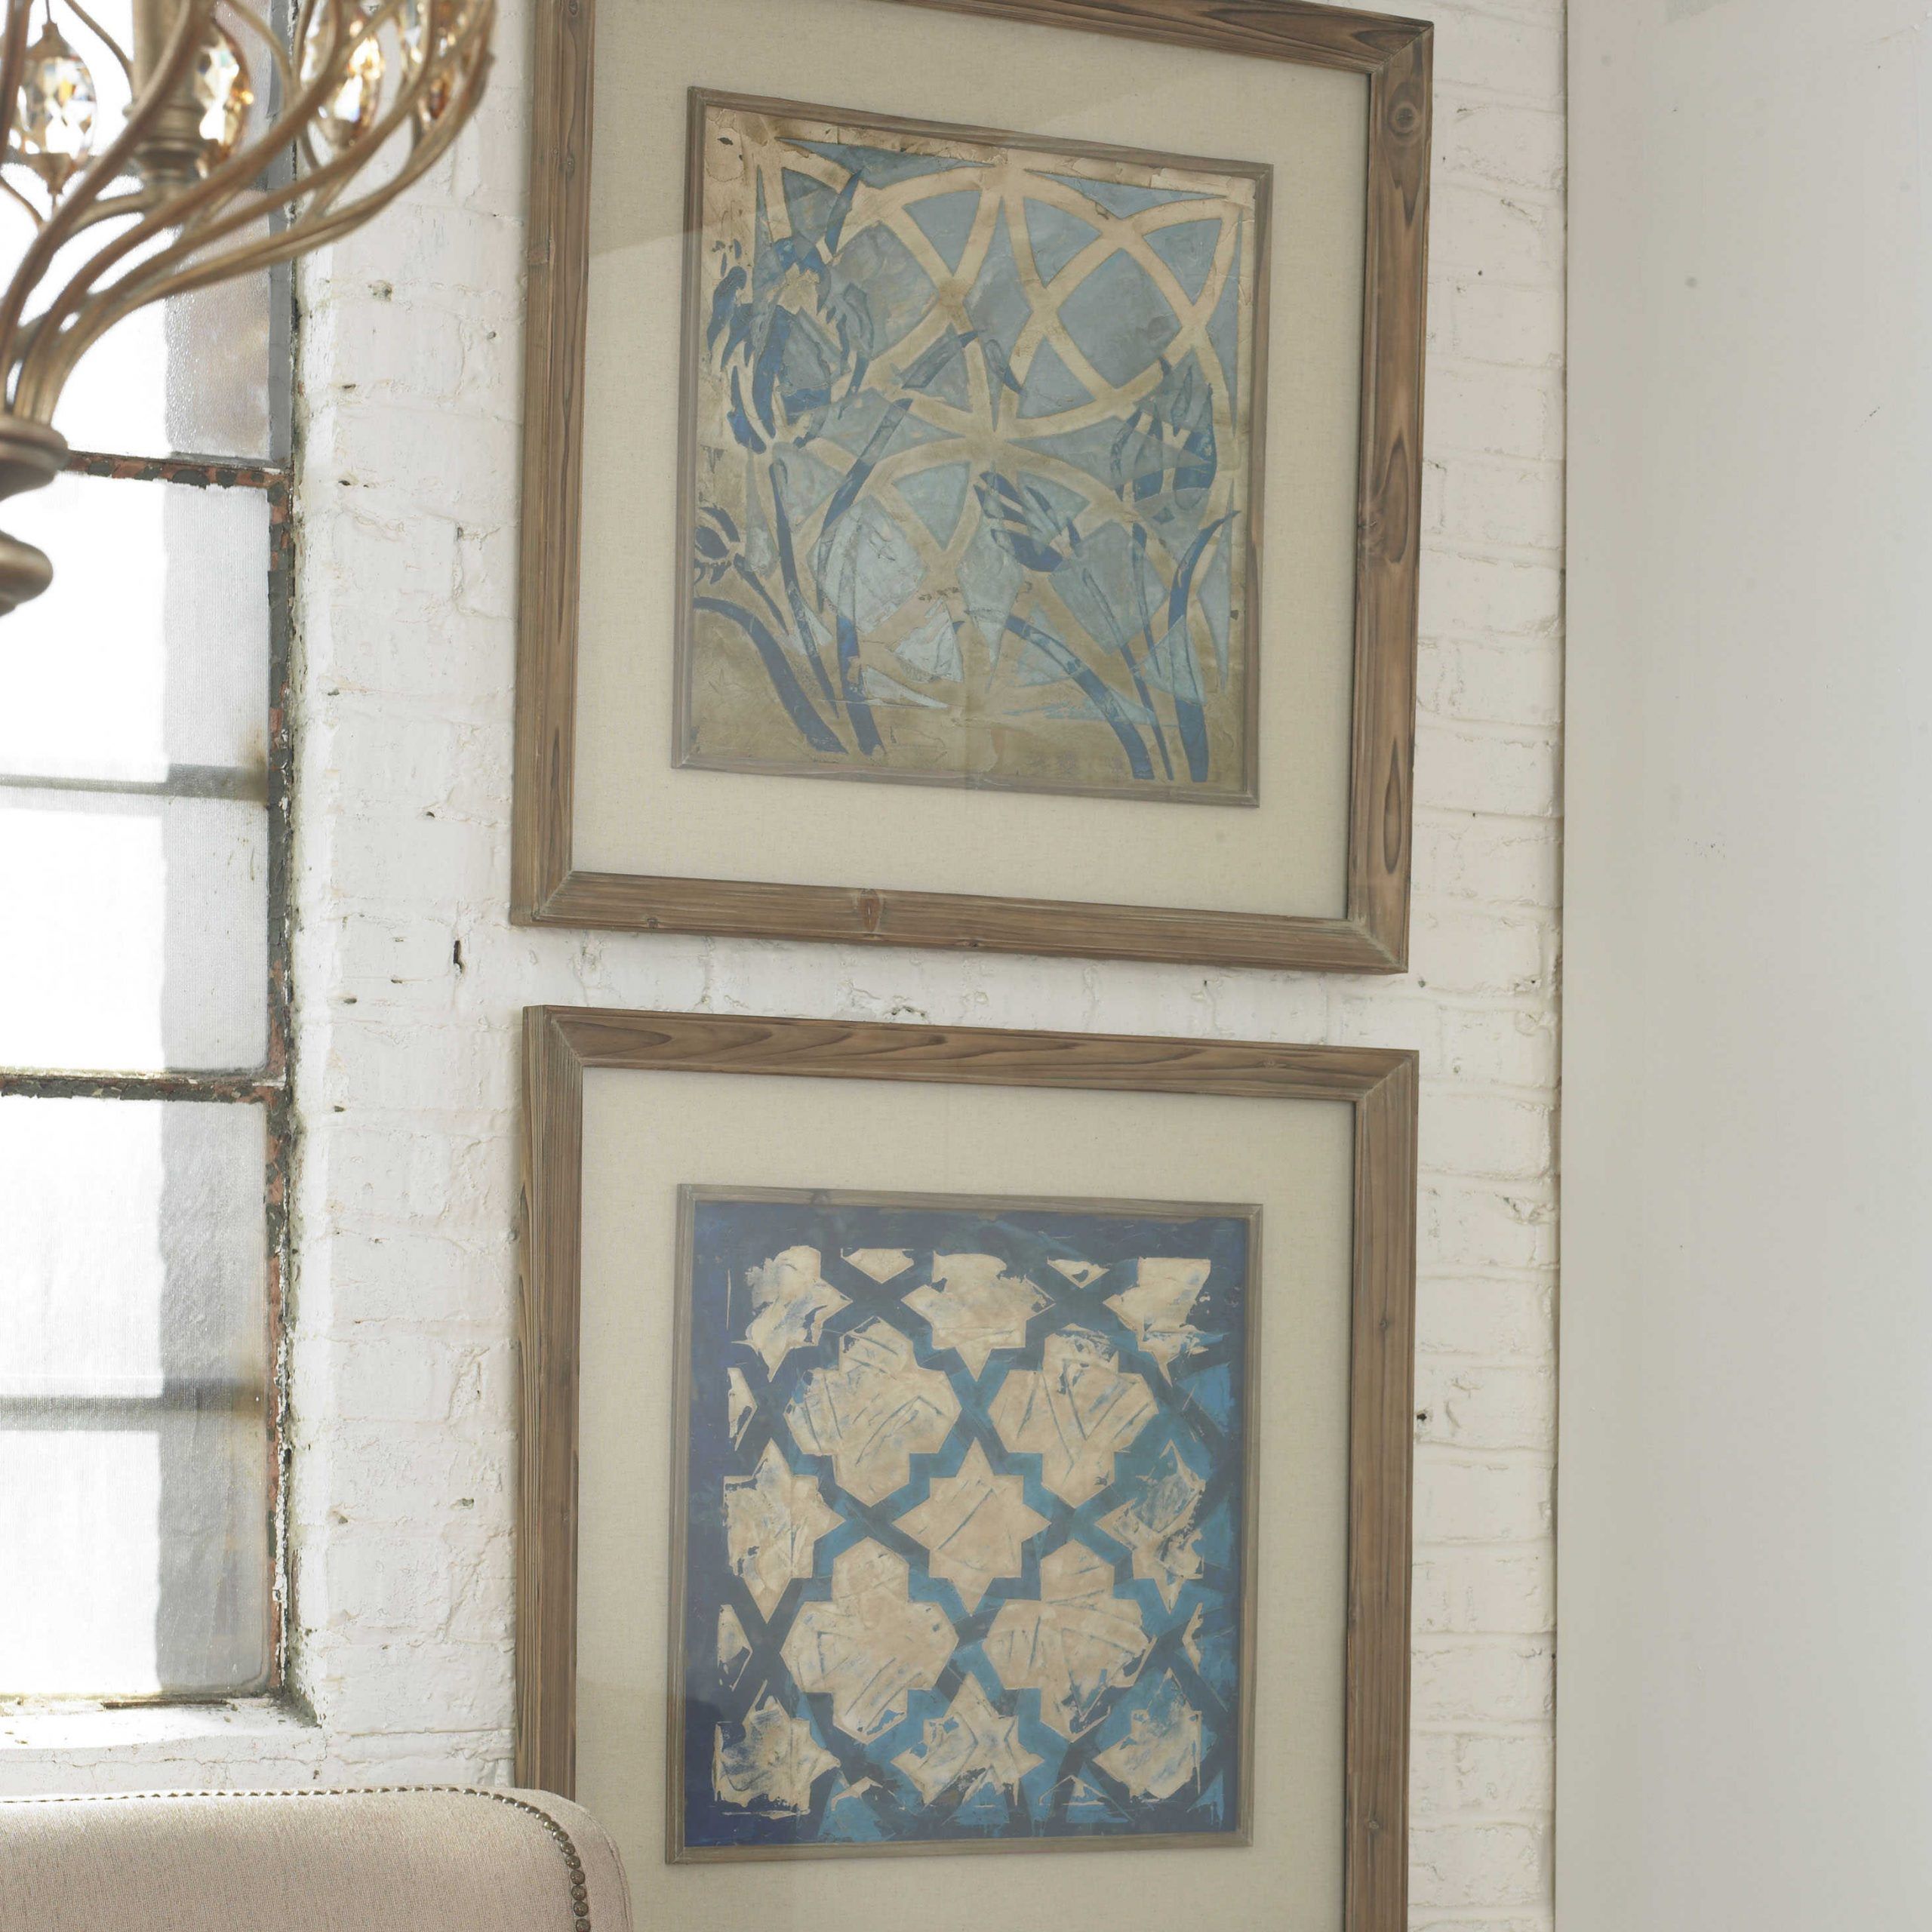 Stained Glass Indigo Framed Prints, S/2 | Uttermost For Minimalism Framed Art Prints (View 8 of 15)